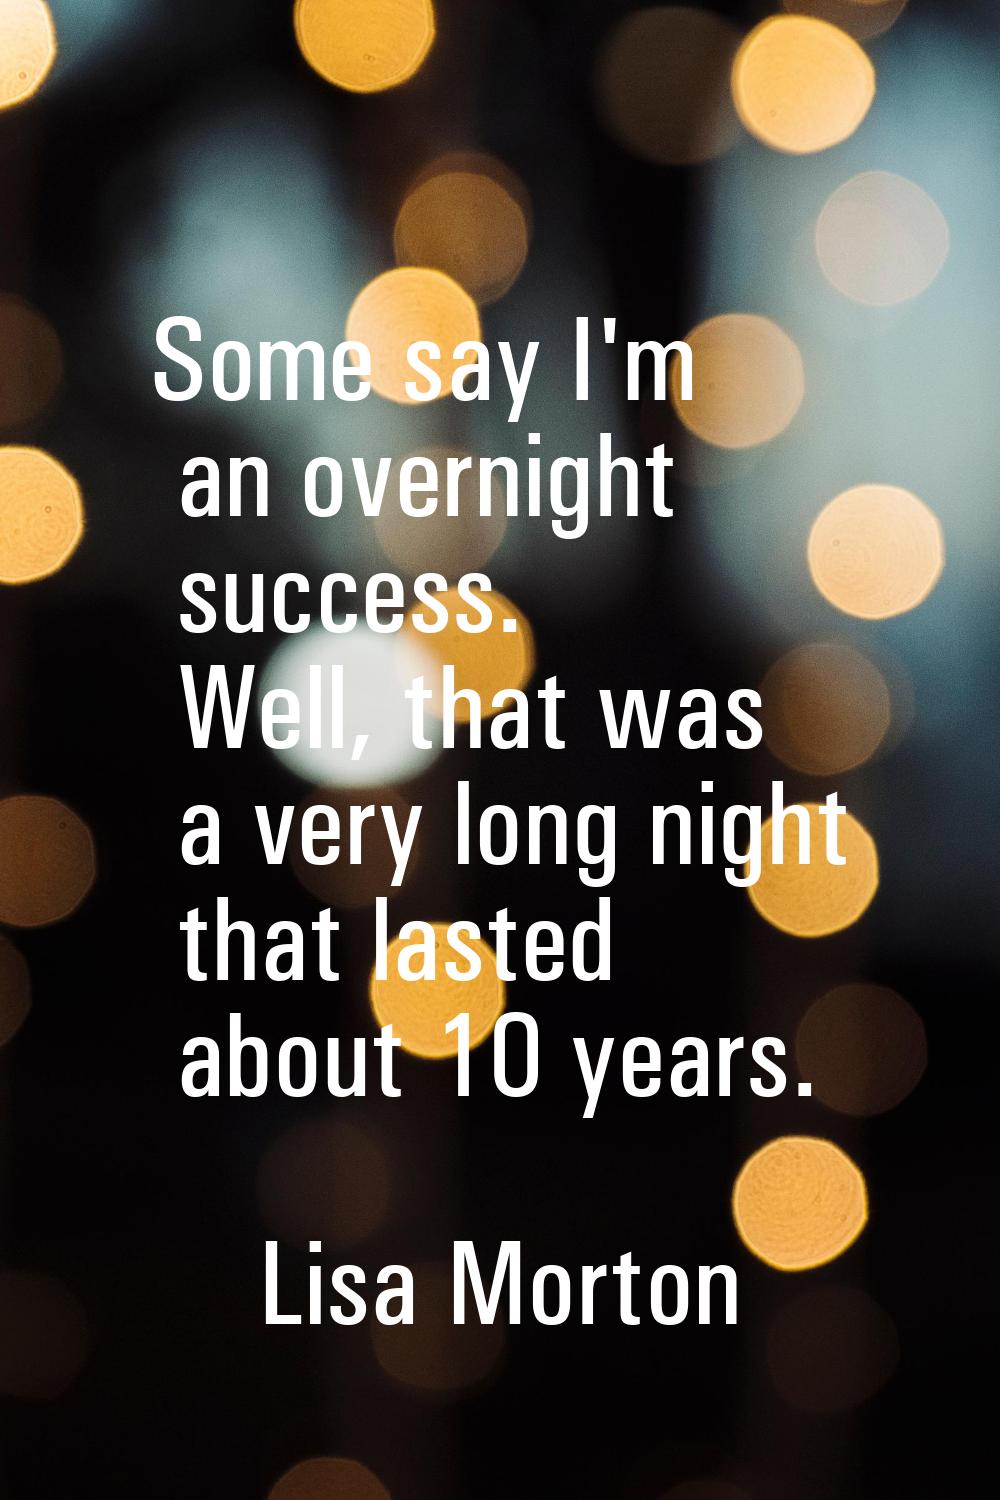 Some say I'm an overnight success. Well, that was a very long night that lasted about 10 years.